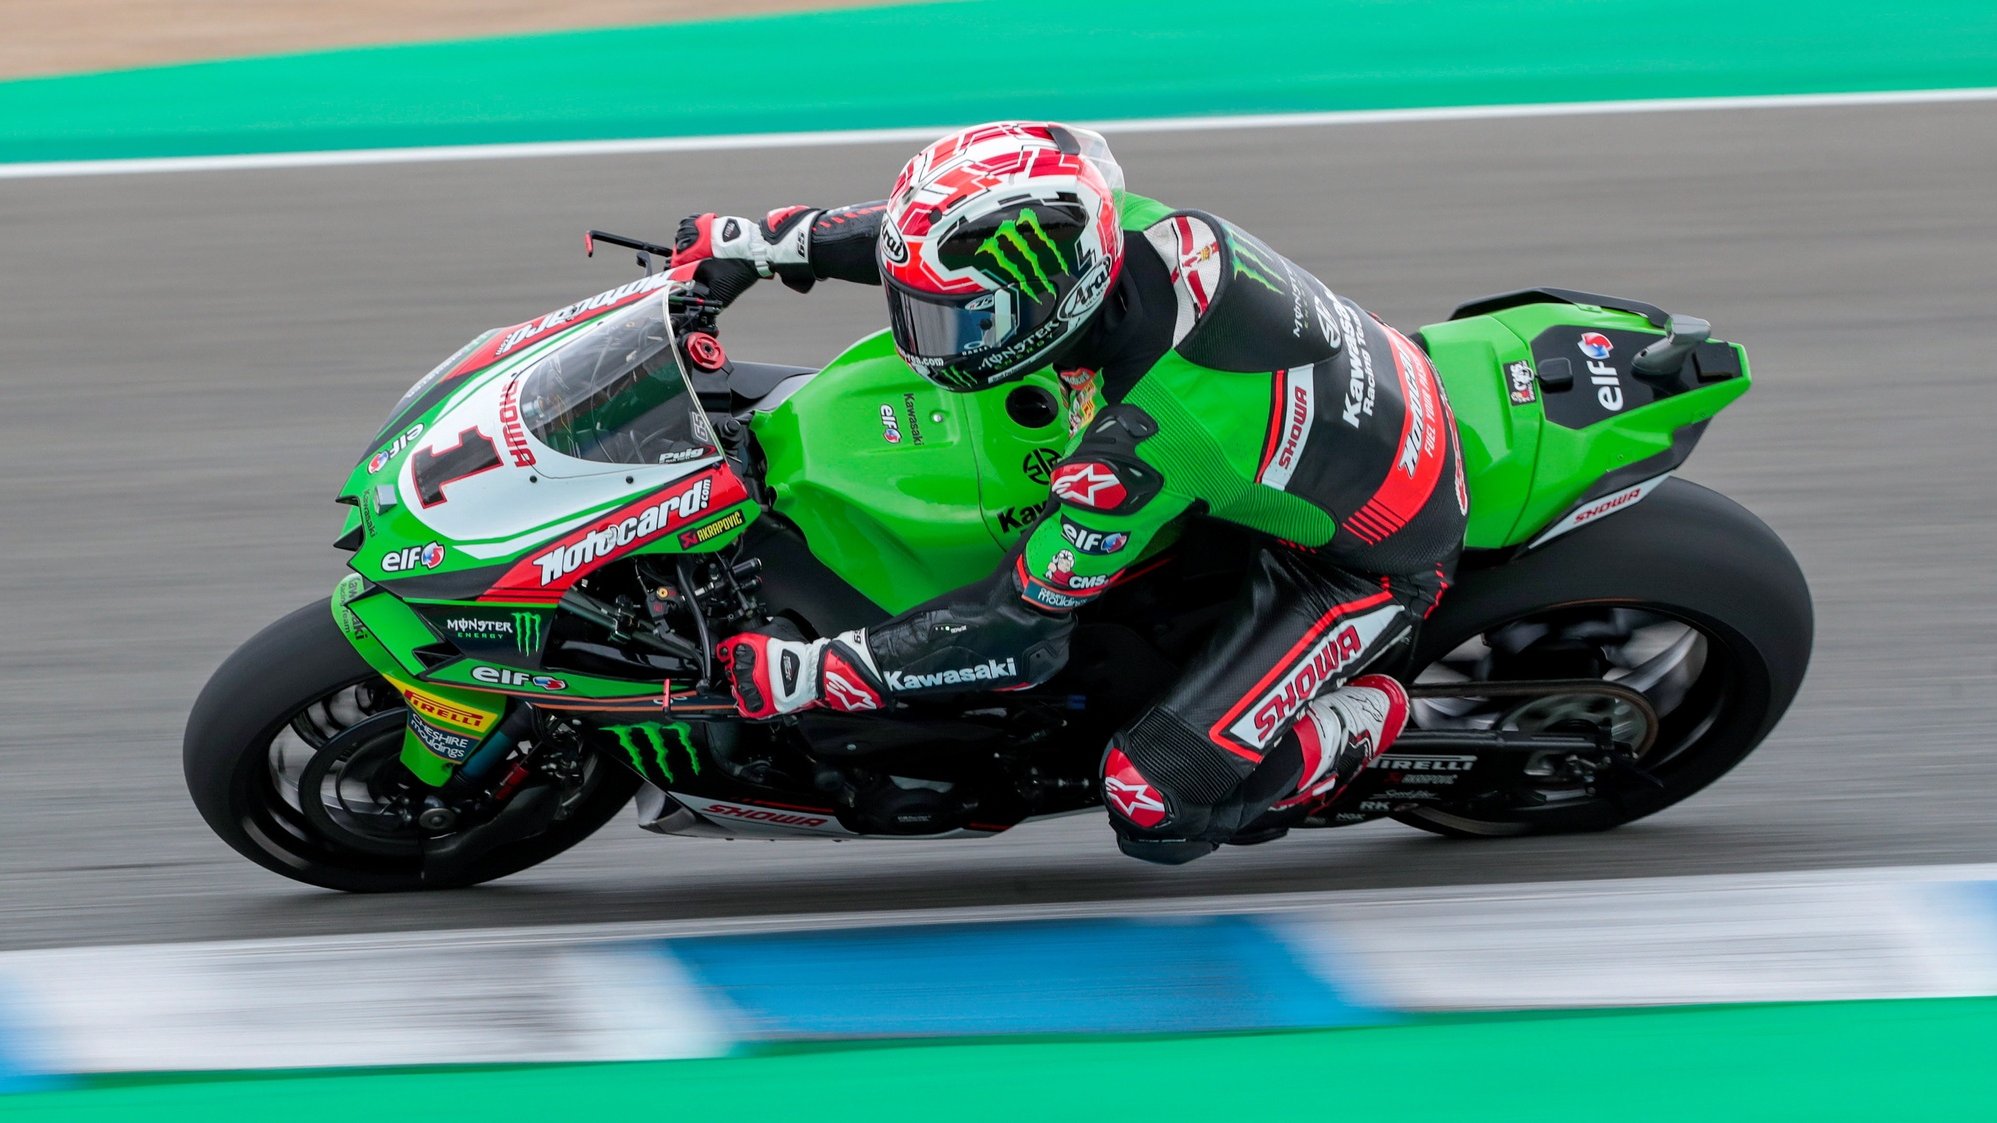 epa09485365 British rider Jonathan Rea of Kawasaki Racing Team in action during a free training session for the Spanish Round of the FIM Superbike World Championship held at Jerez-Angel Nieto race track in Jerez, Andalusia, Spain, 24 September 2021. The race will take place on 25-26 September 2021.  EPA/ROMAN RIOS